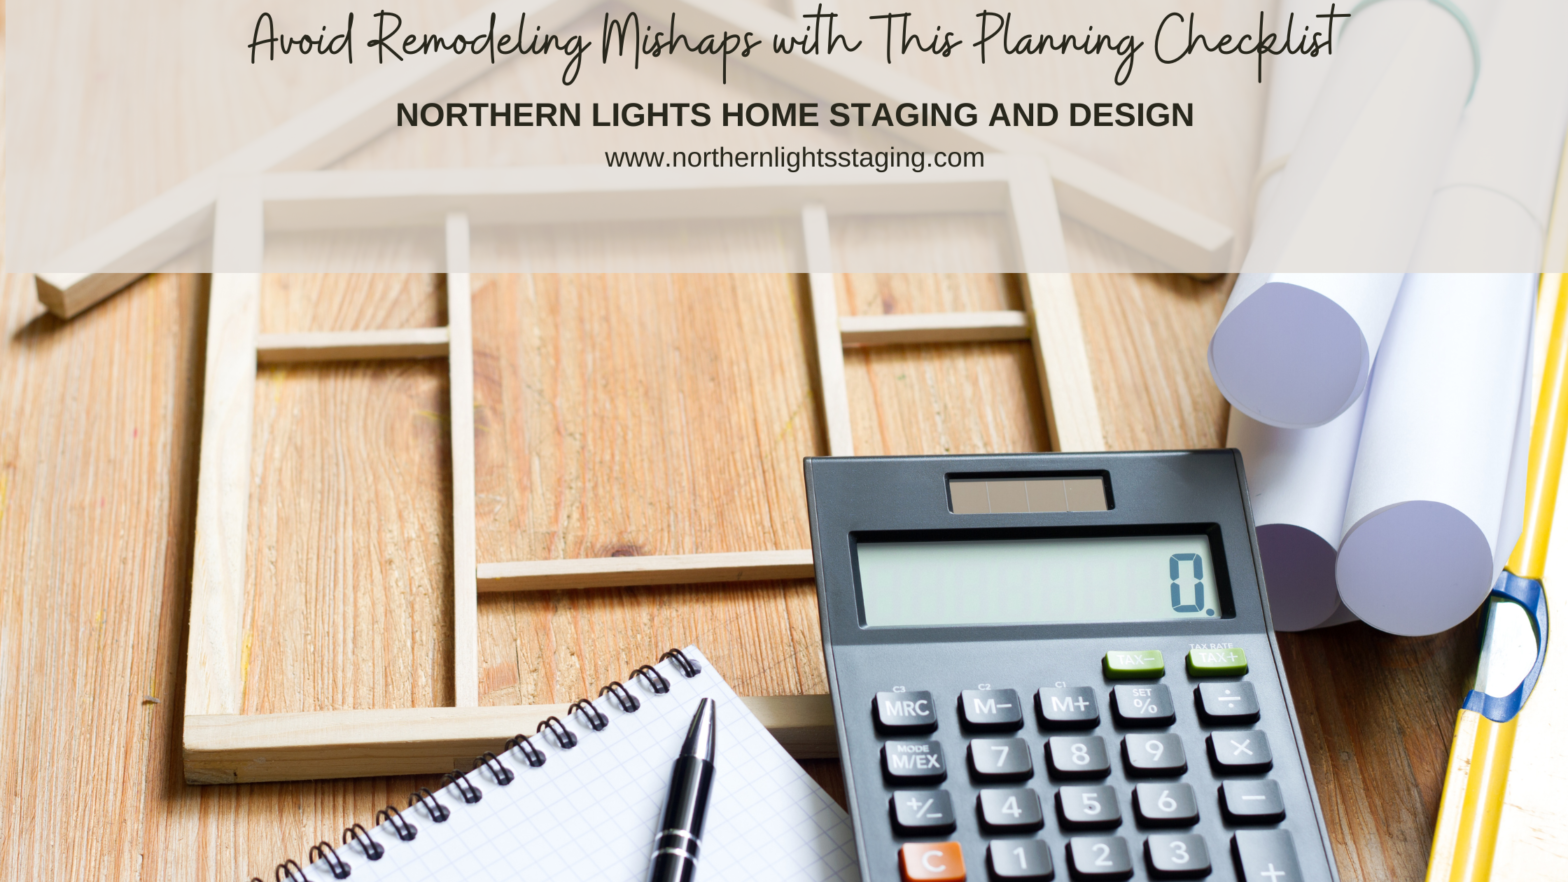 Avoid Remodeling Mishaps with This Planning Checklist by Ray Flynn for Northern Lights Home Staging and Design.